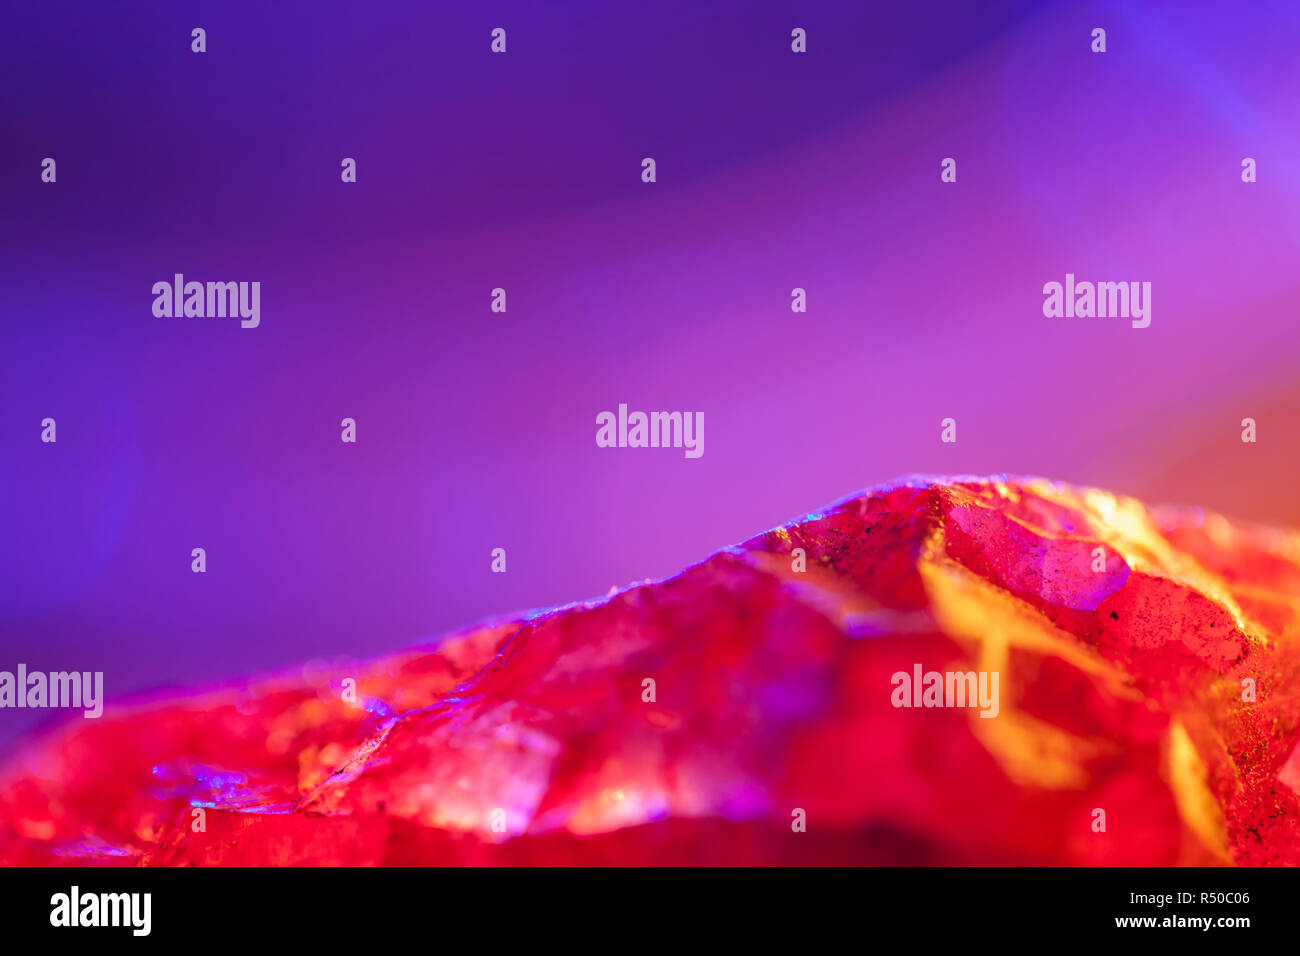 Pink Quartz crystal specimen shot using beautiful colourful lighting.Pink Gemstone.With copy space. Stock Photo